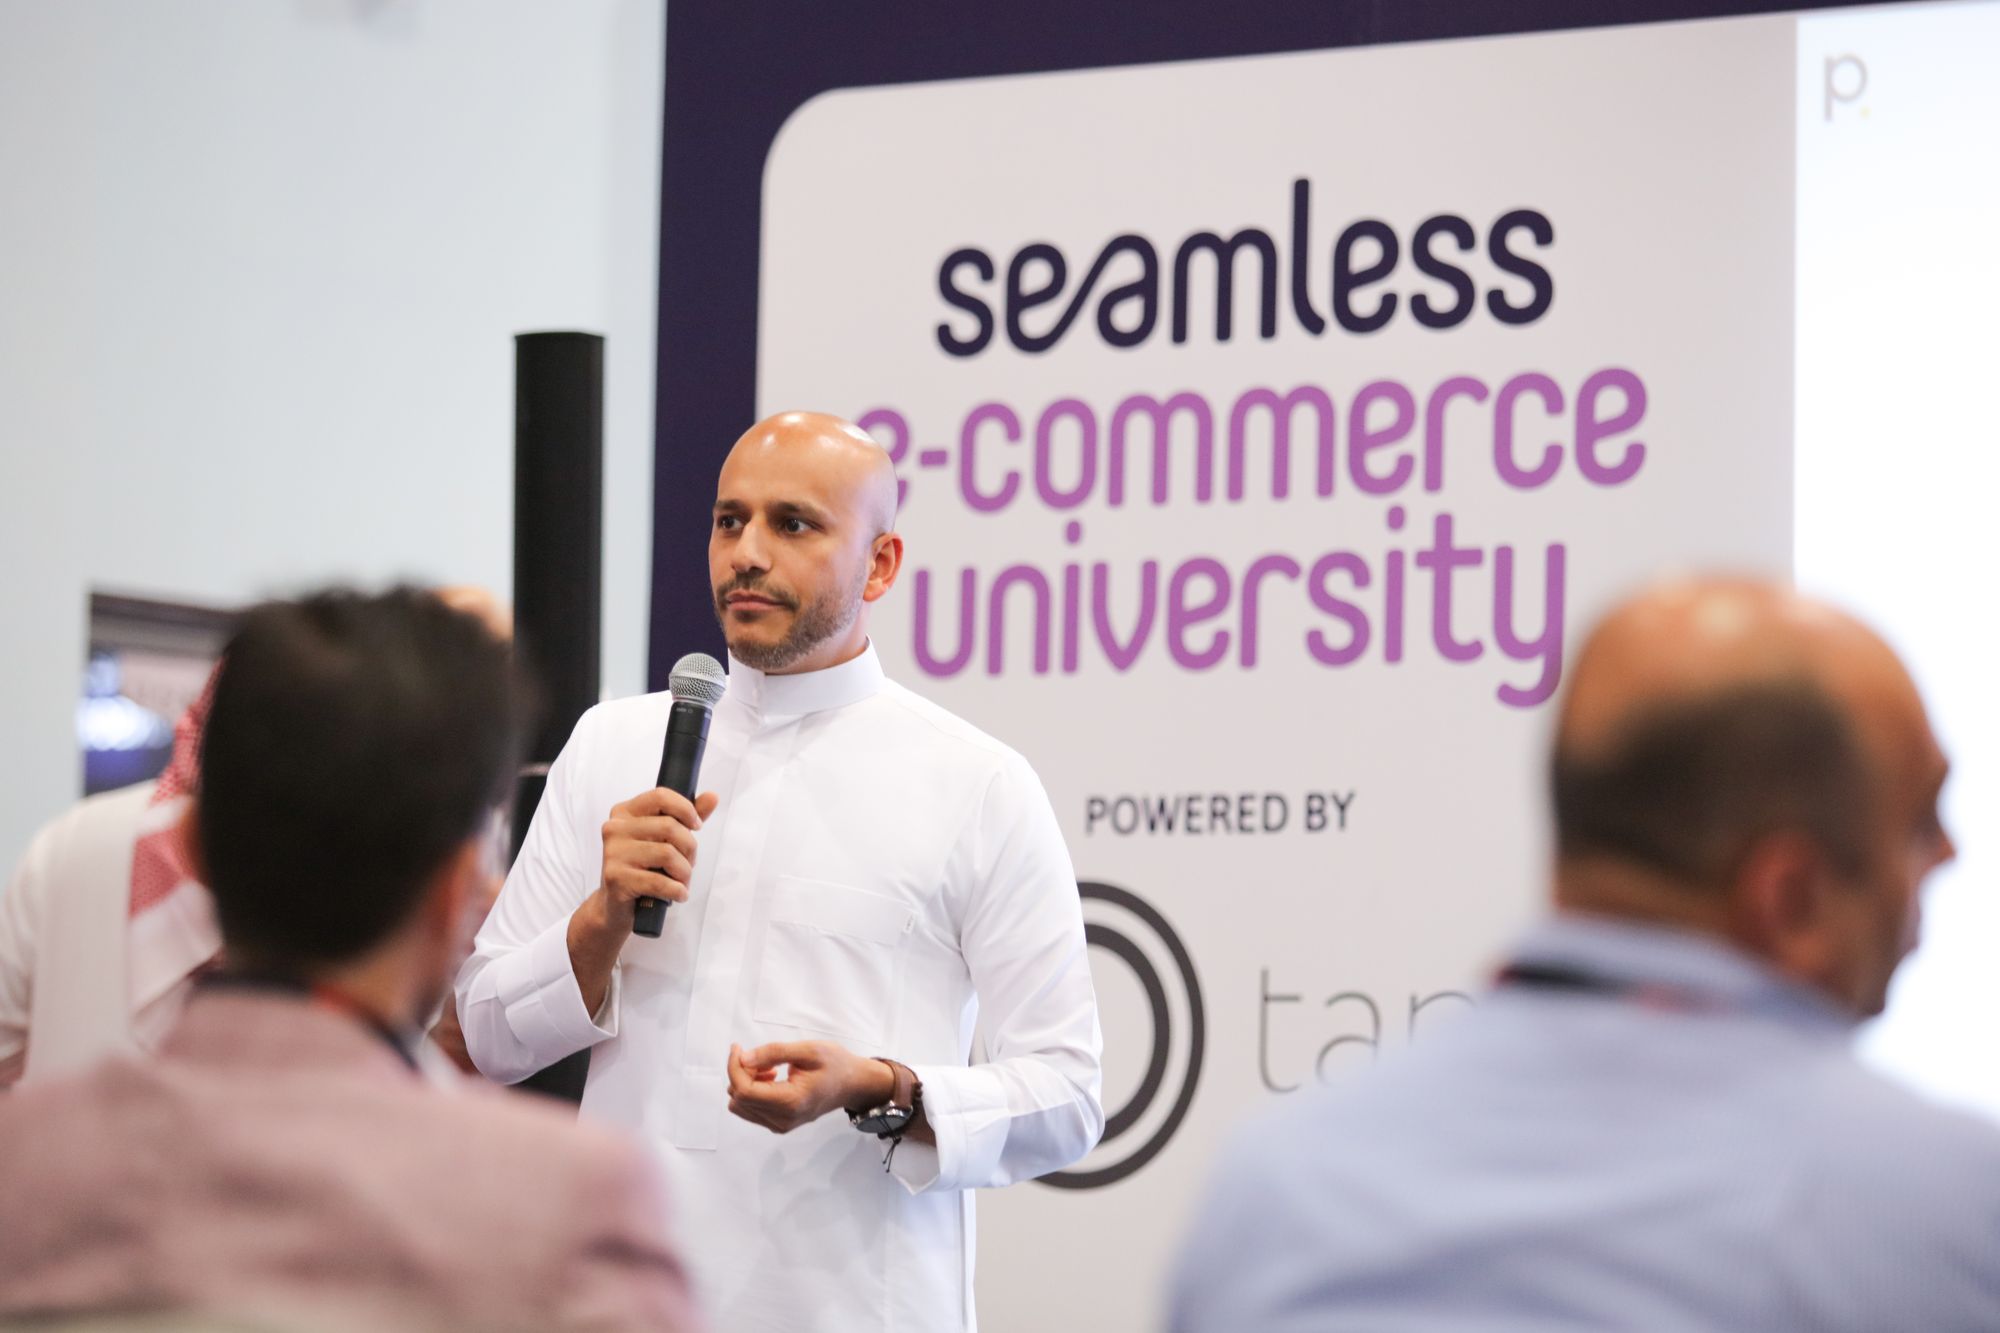 eCommerce University at Seamless Saudi, powered by Tap Payments